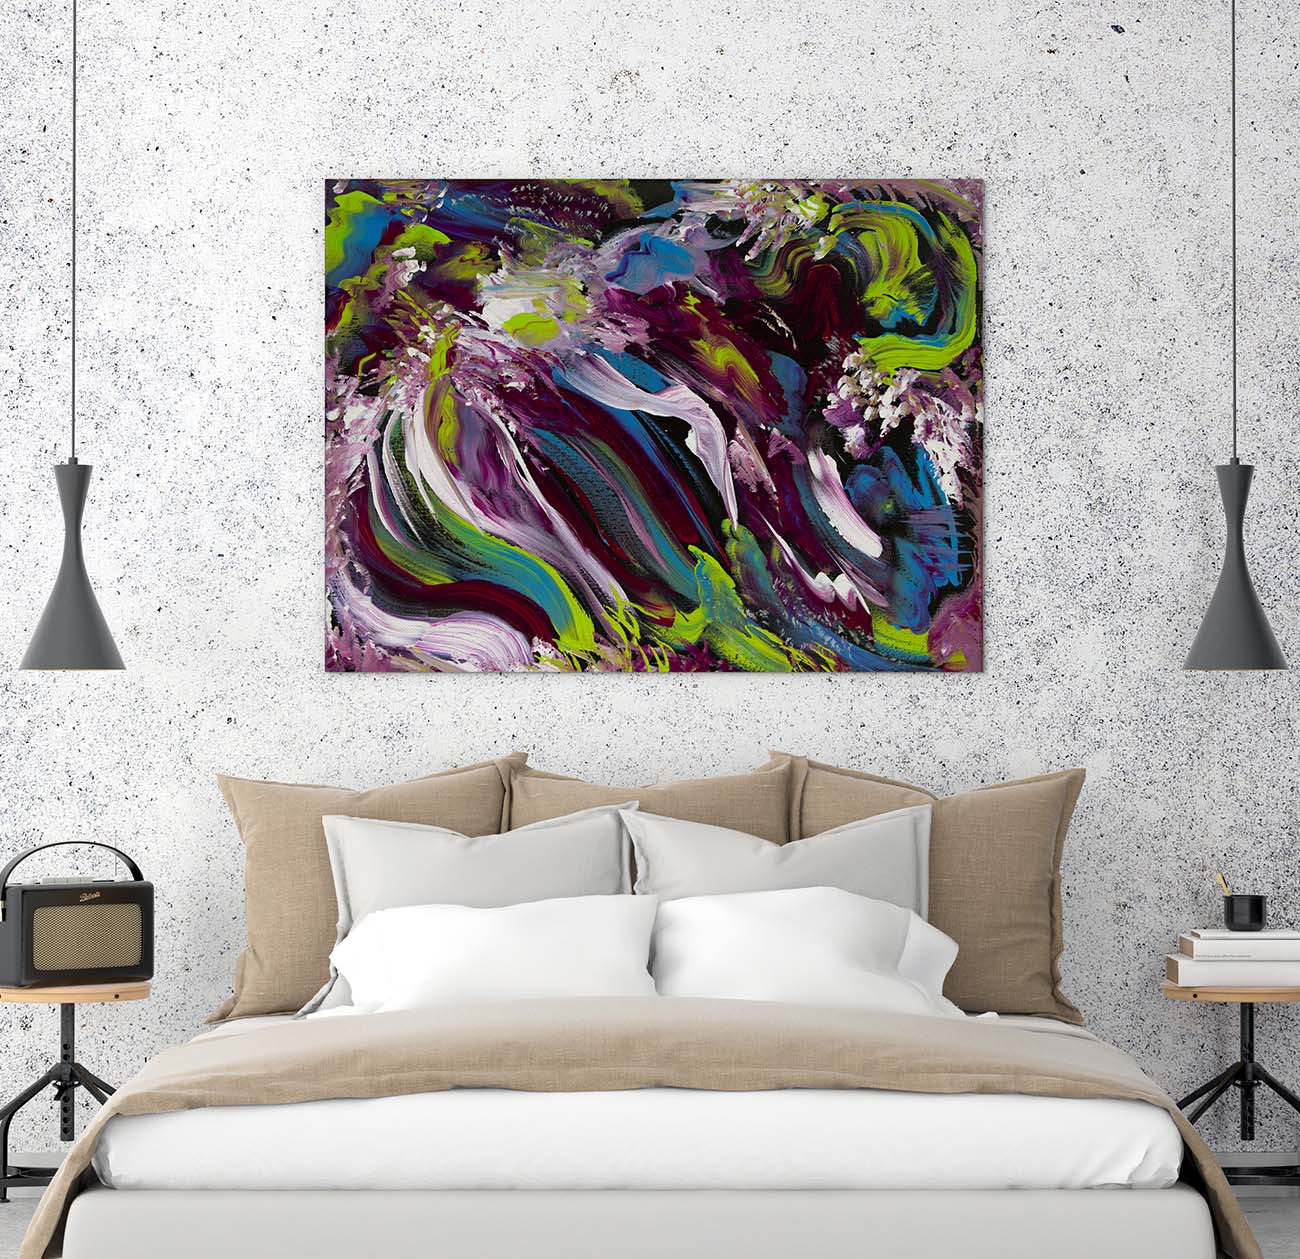 Zivid abstract art by Doug LaRue, large metal print on a concrete wall over a bed